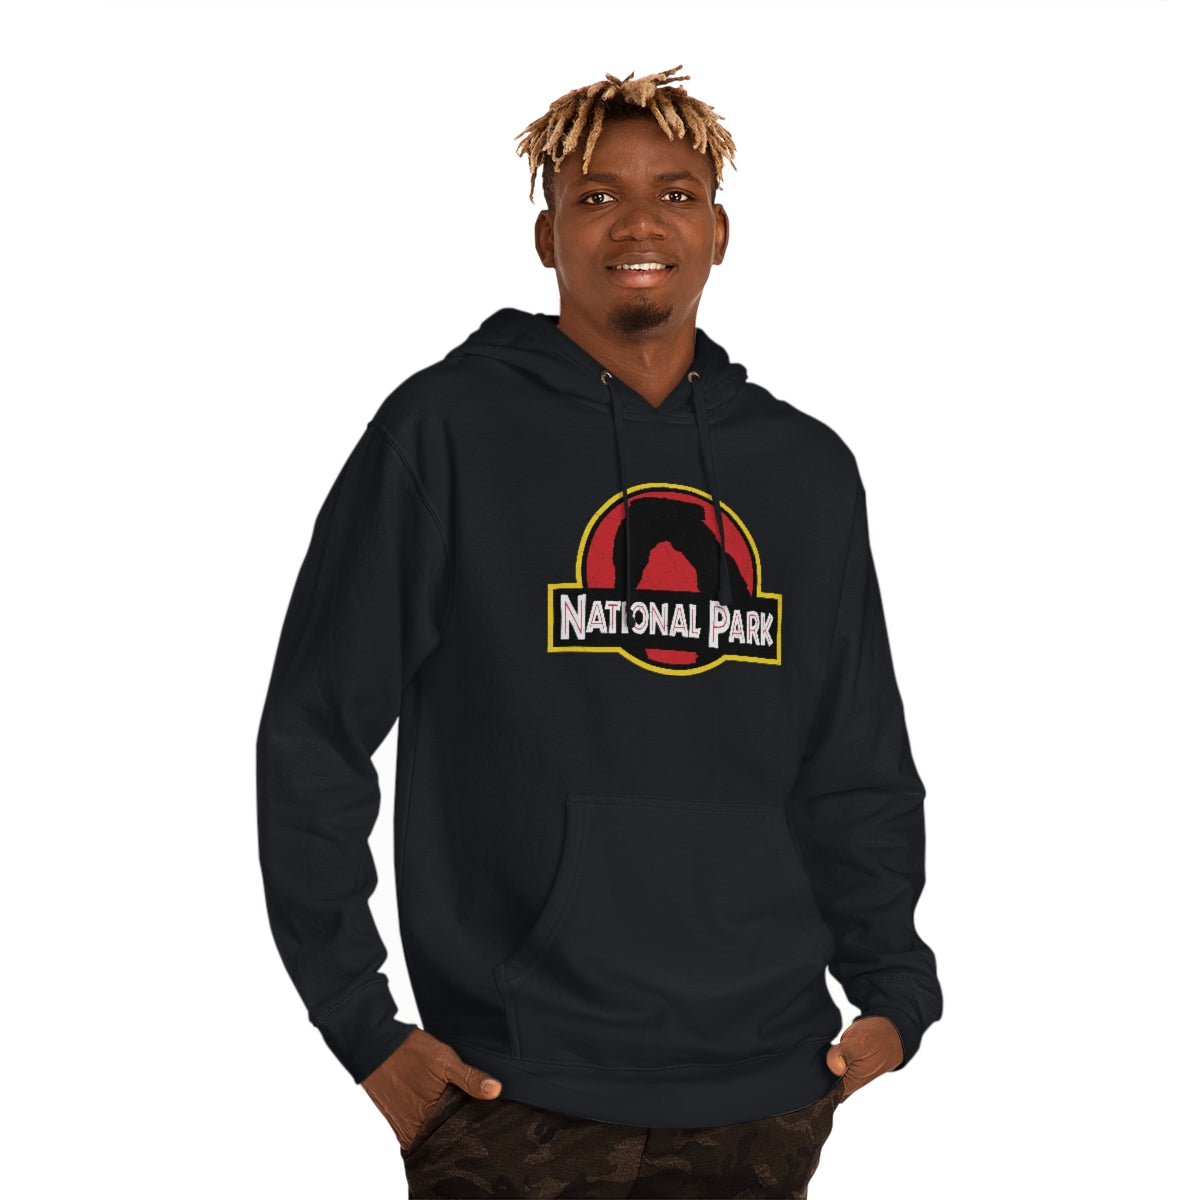 Arches National Park Hoodie - Delicate Arch Parody Logo